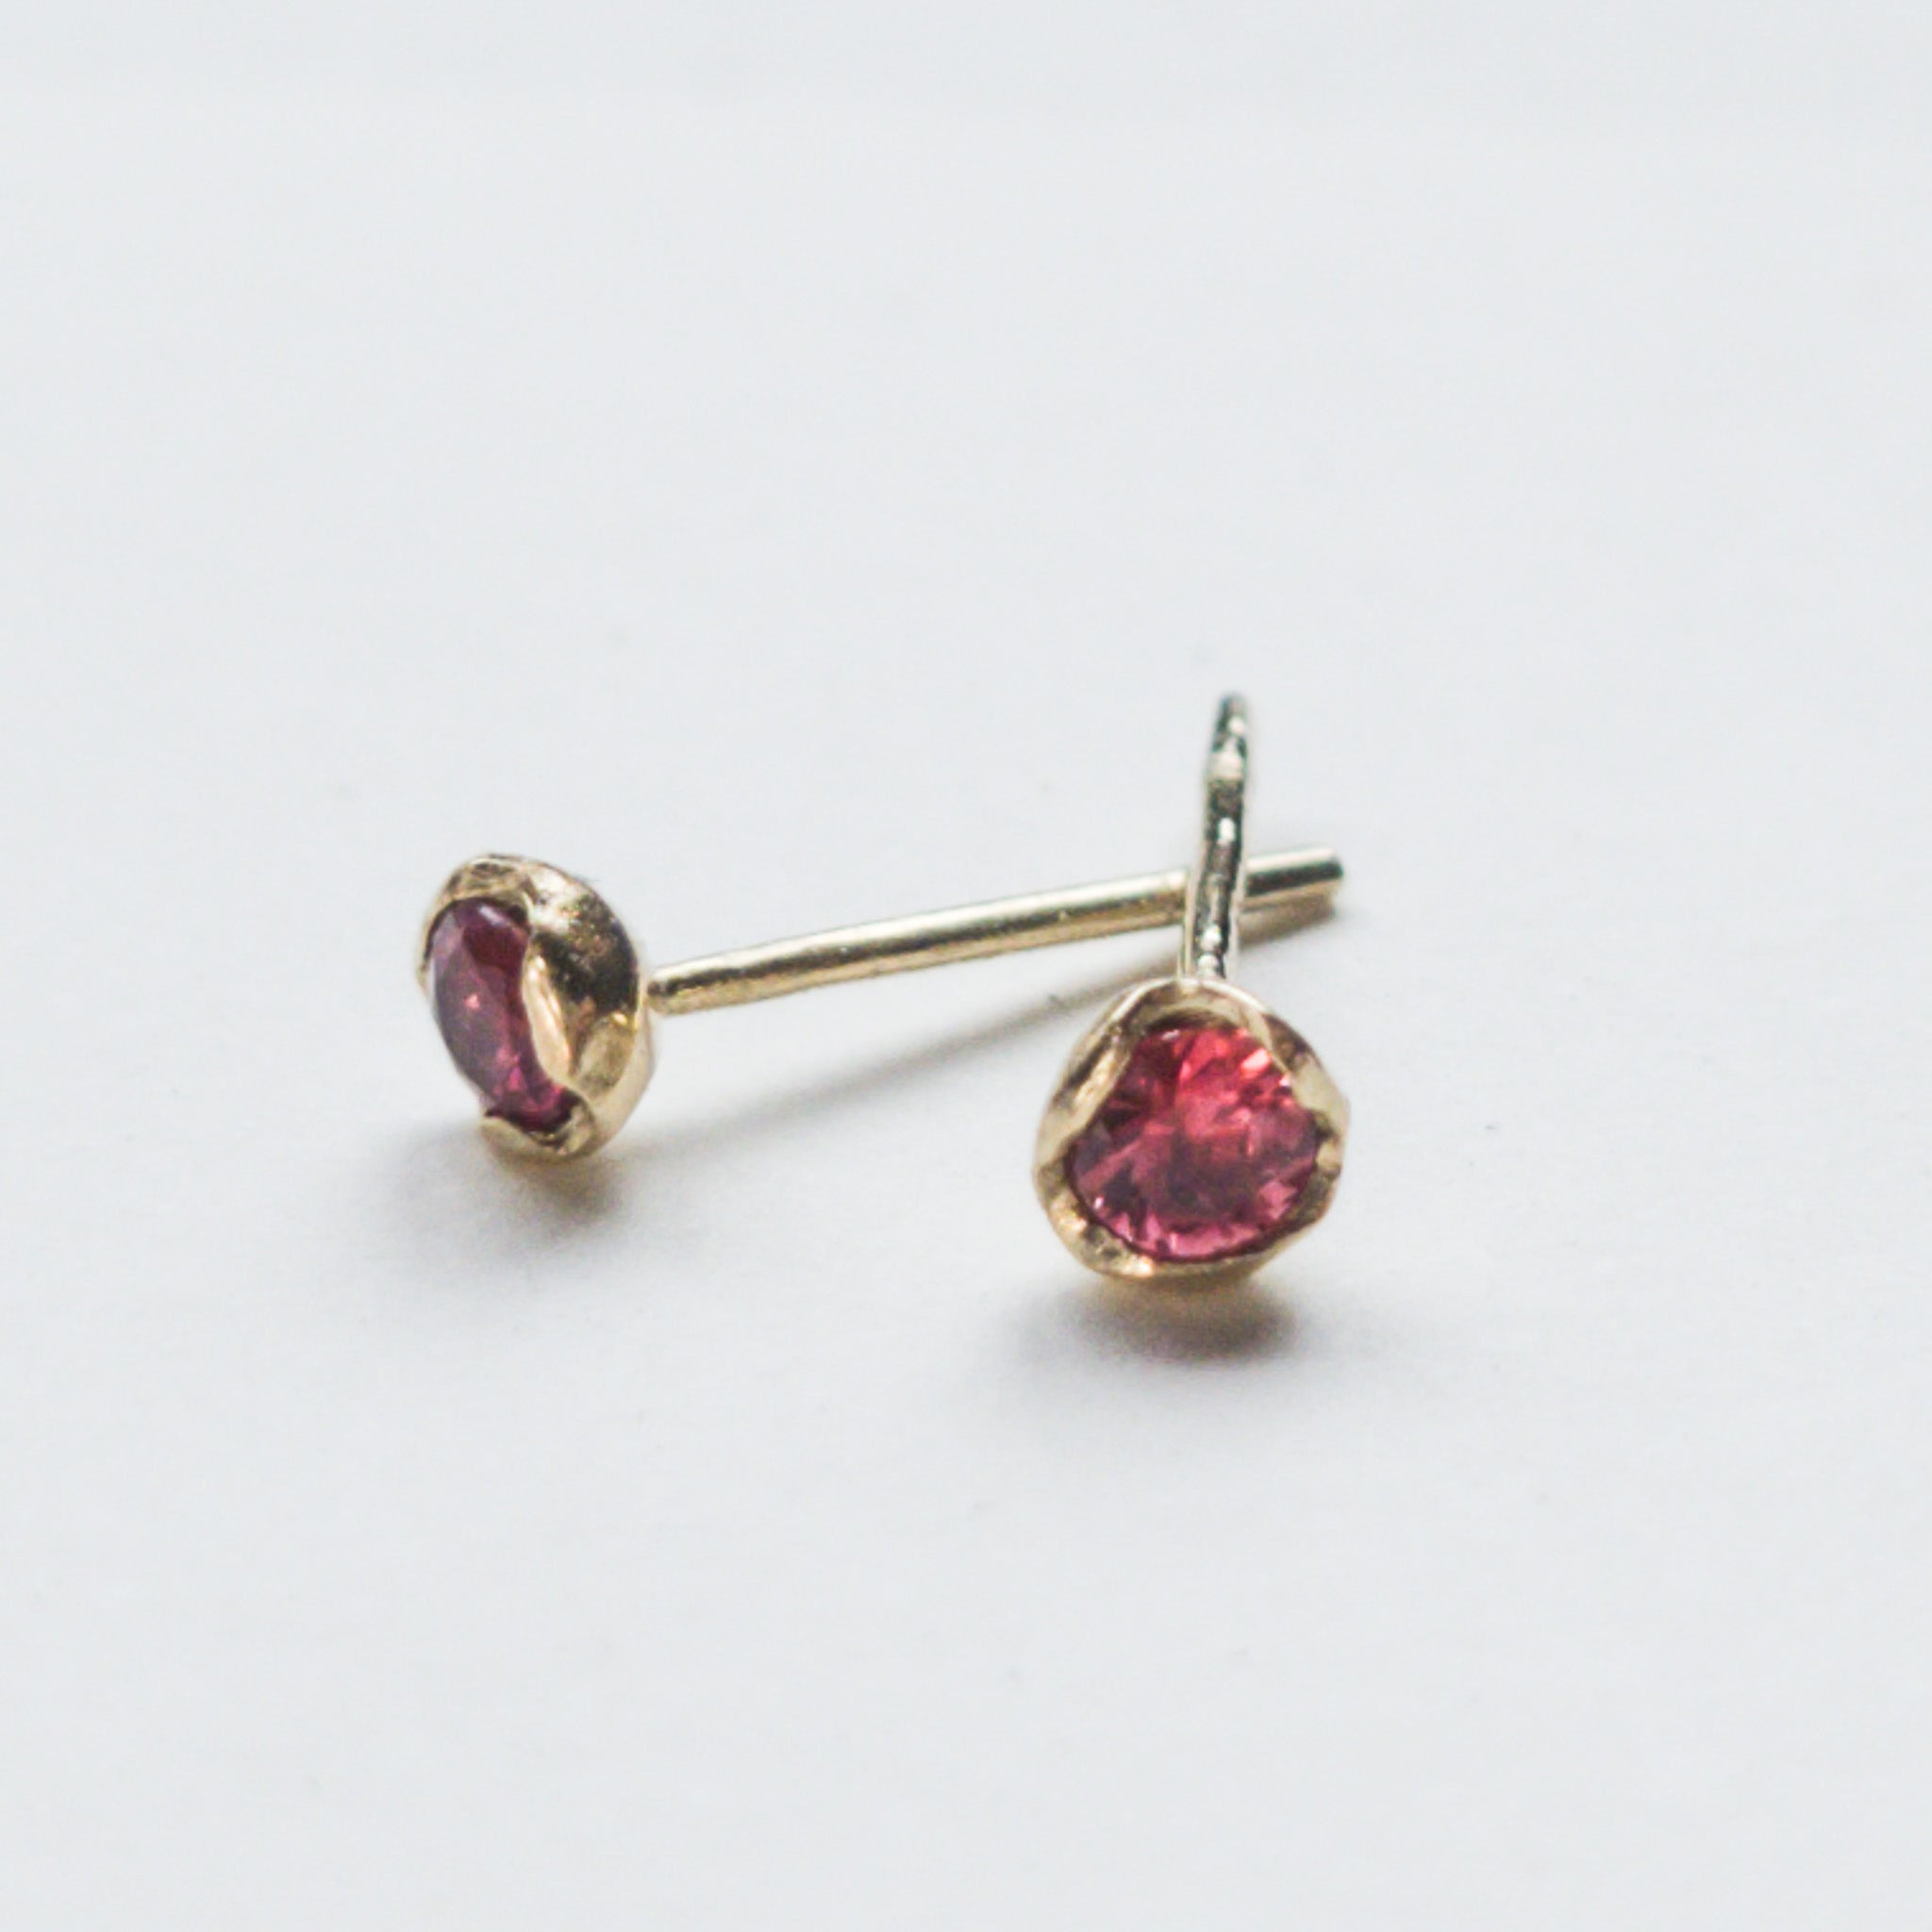 3-FOLD STUD EARRING PAIR - 9CT GOLD - PINK SAPPHIRE